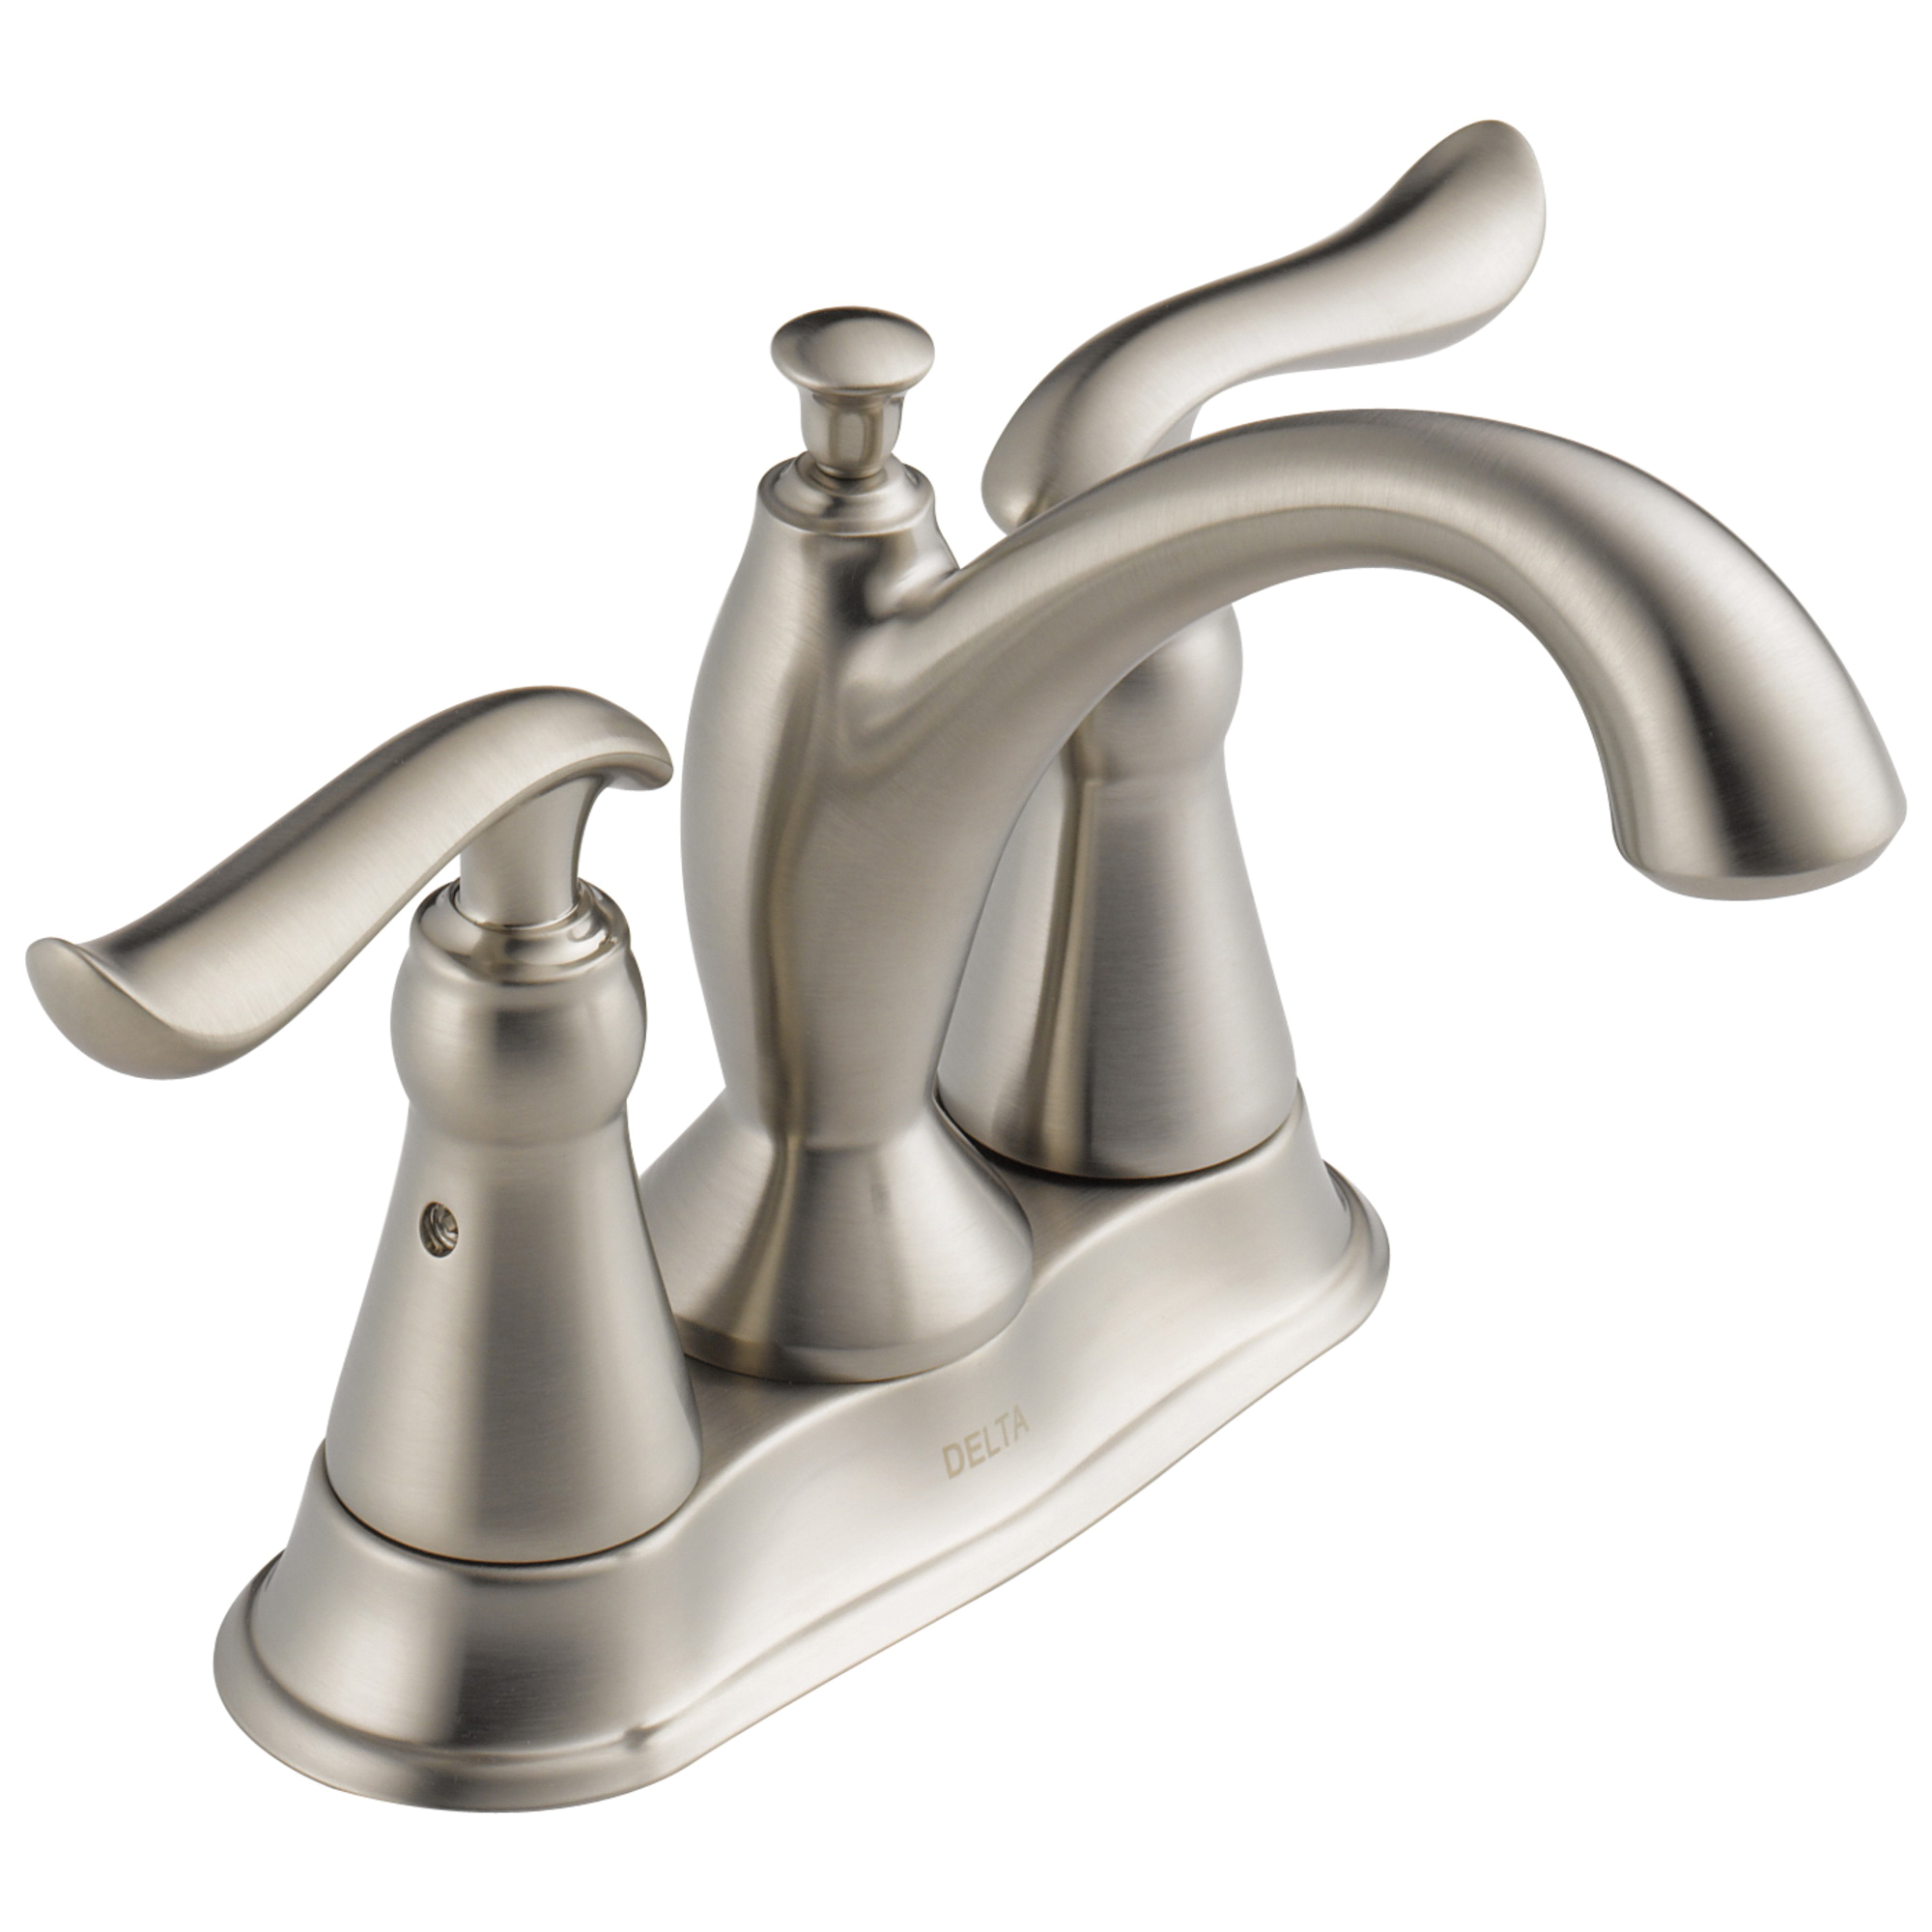 DELTA® 2594-SSTP-DST Tract-Pack™ Centerset Lavatory Faucet, Linden™, Stainless Steel, 2 Handles, 50/50 Pop-Up Drain, 1.2 gpm